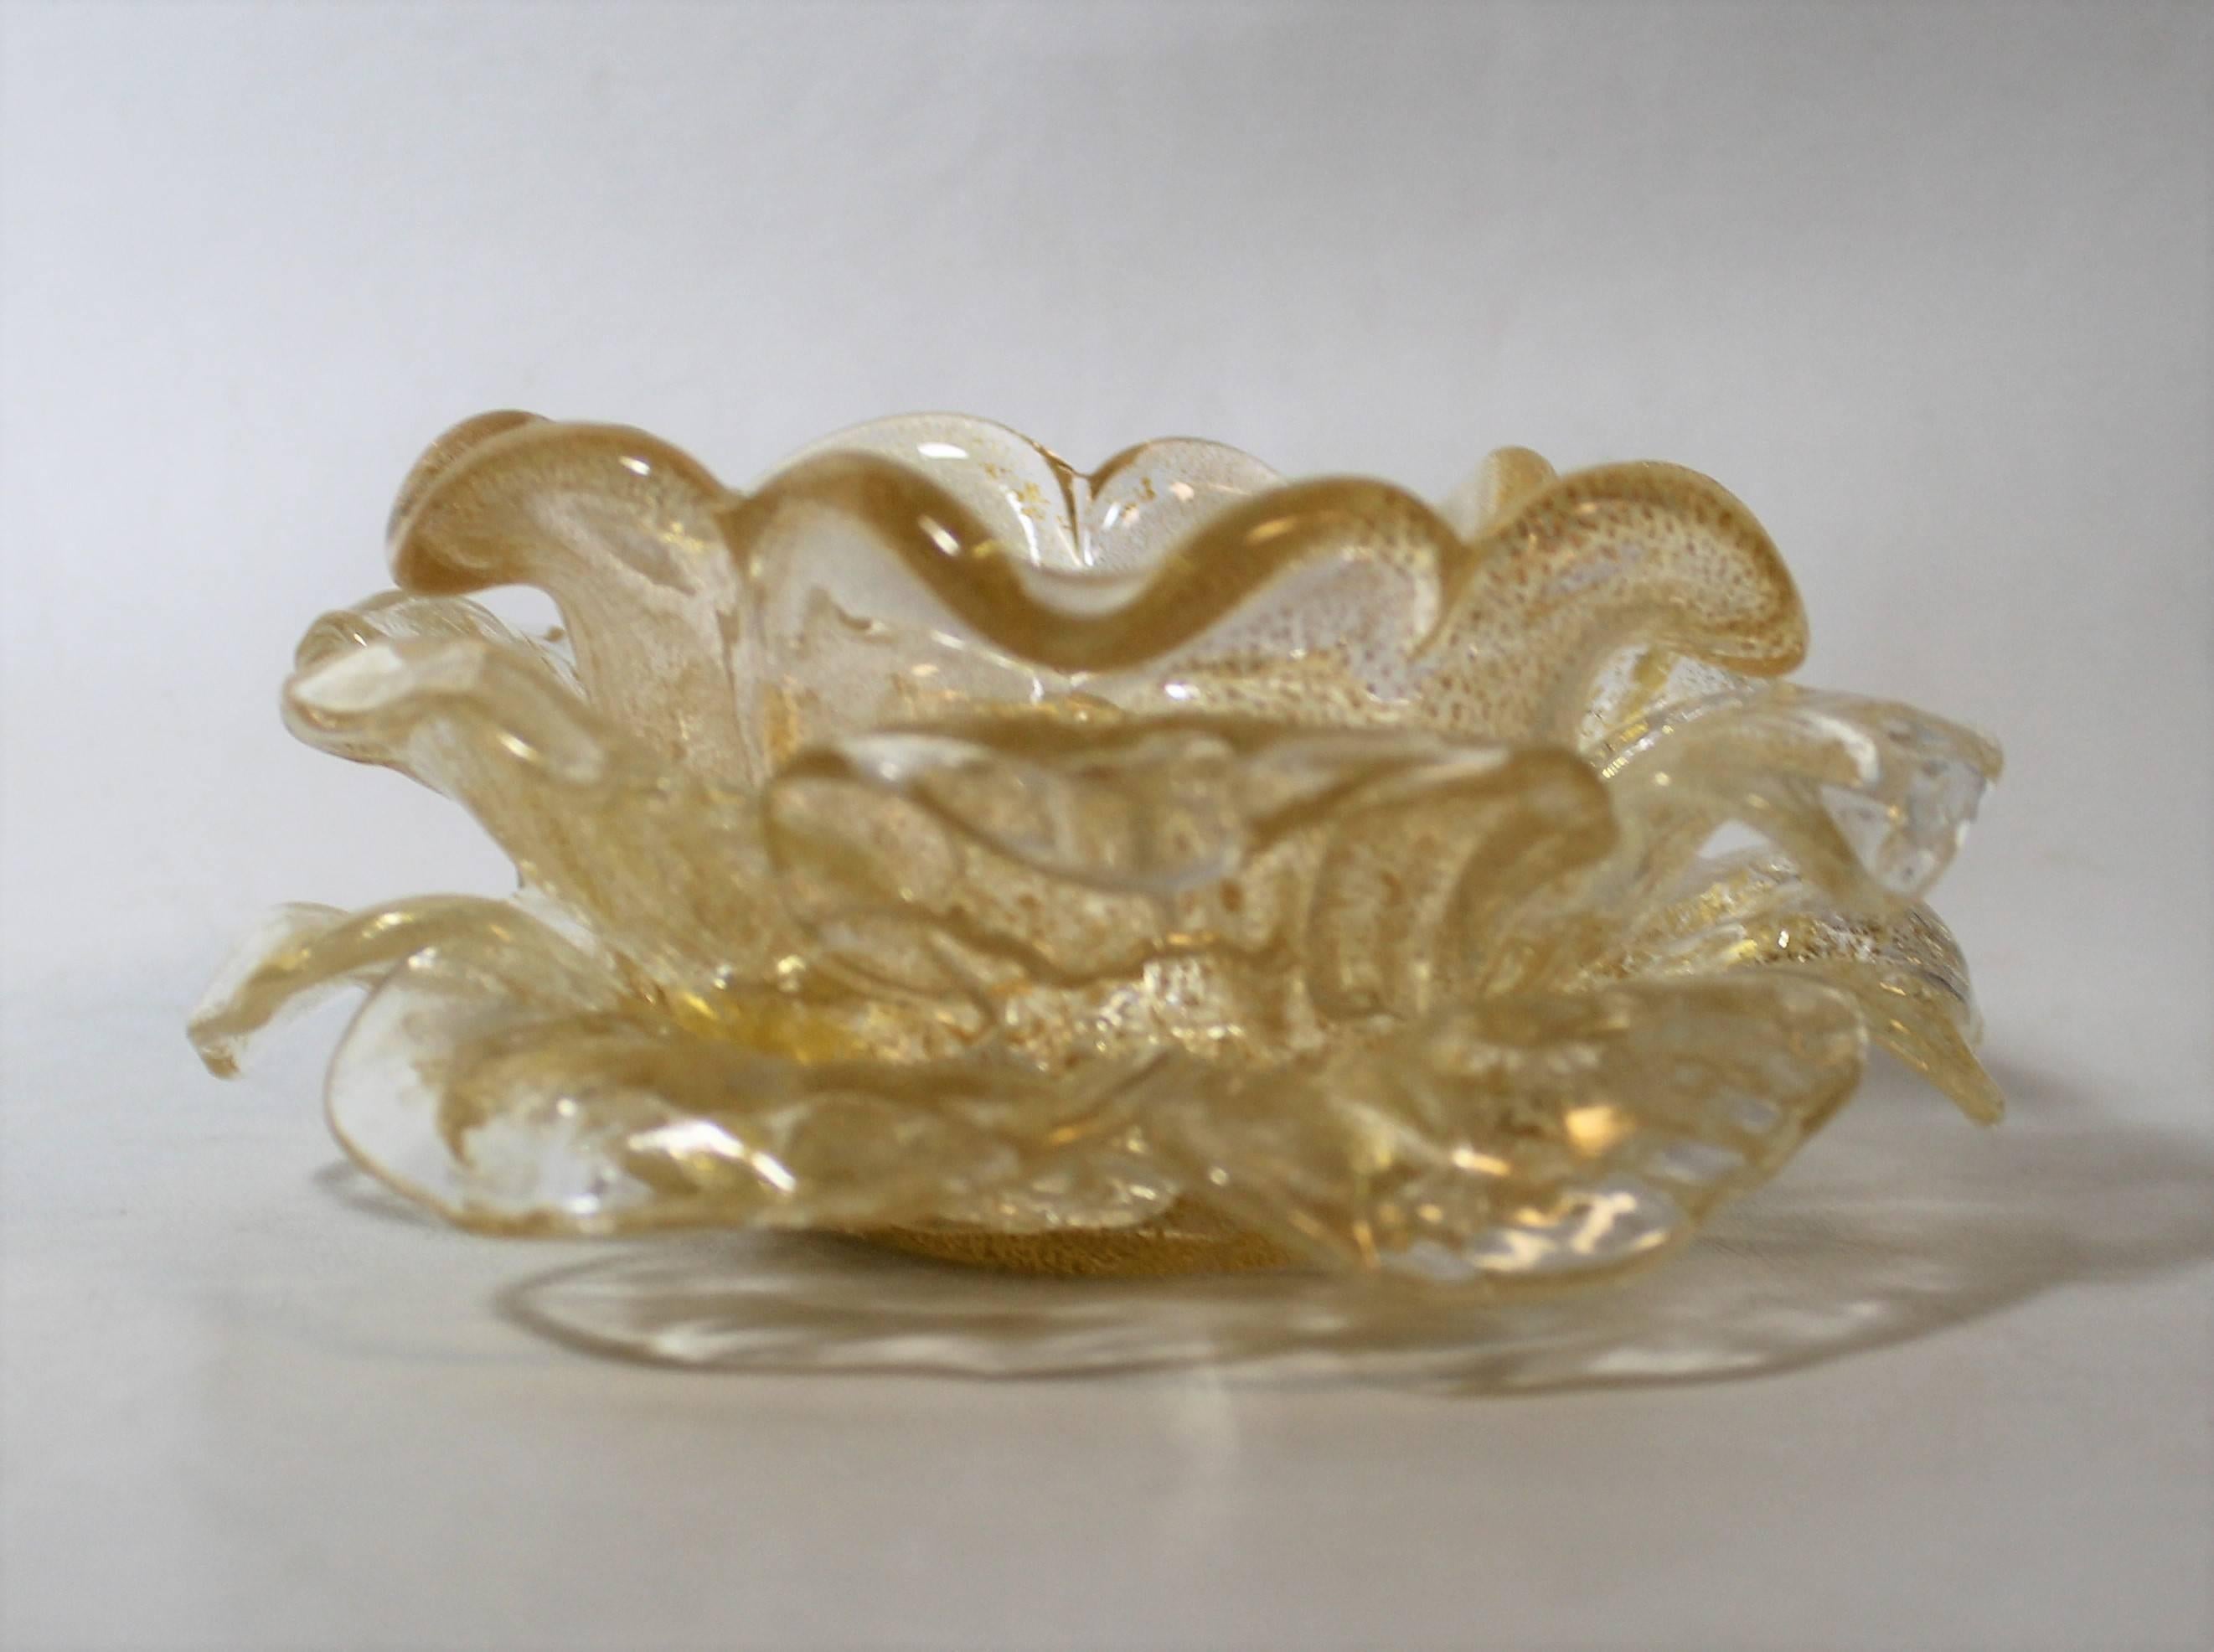 Nine enchanting Italian Venetian art glass finger bowls in the form of an open rose. The naturalistically curving flower petals have Cordonato d'Oro type gold foil inclusions throughout. We are selling these as a set of nine that are in excellent